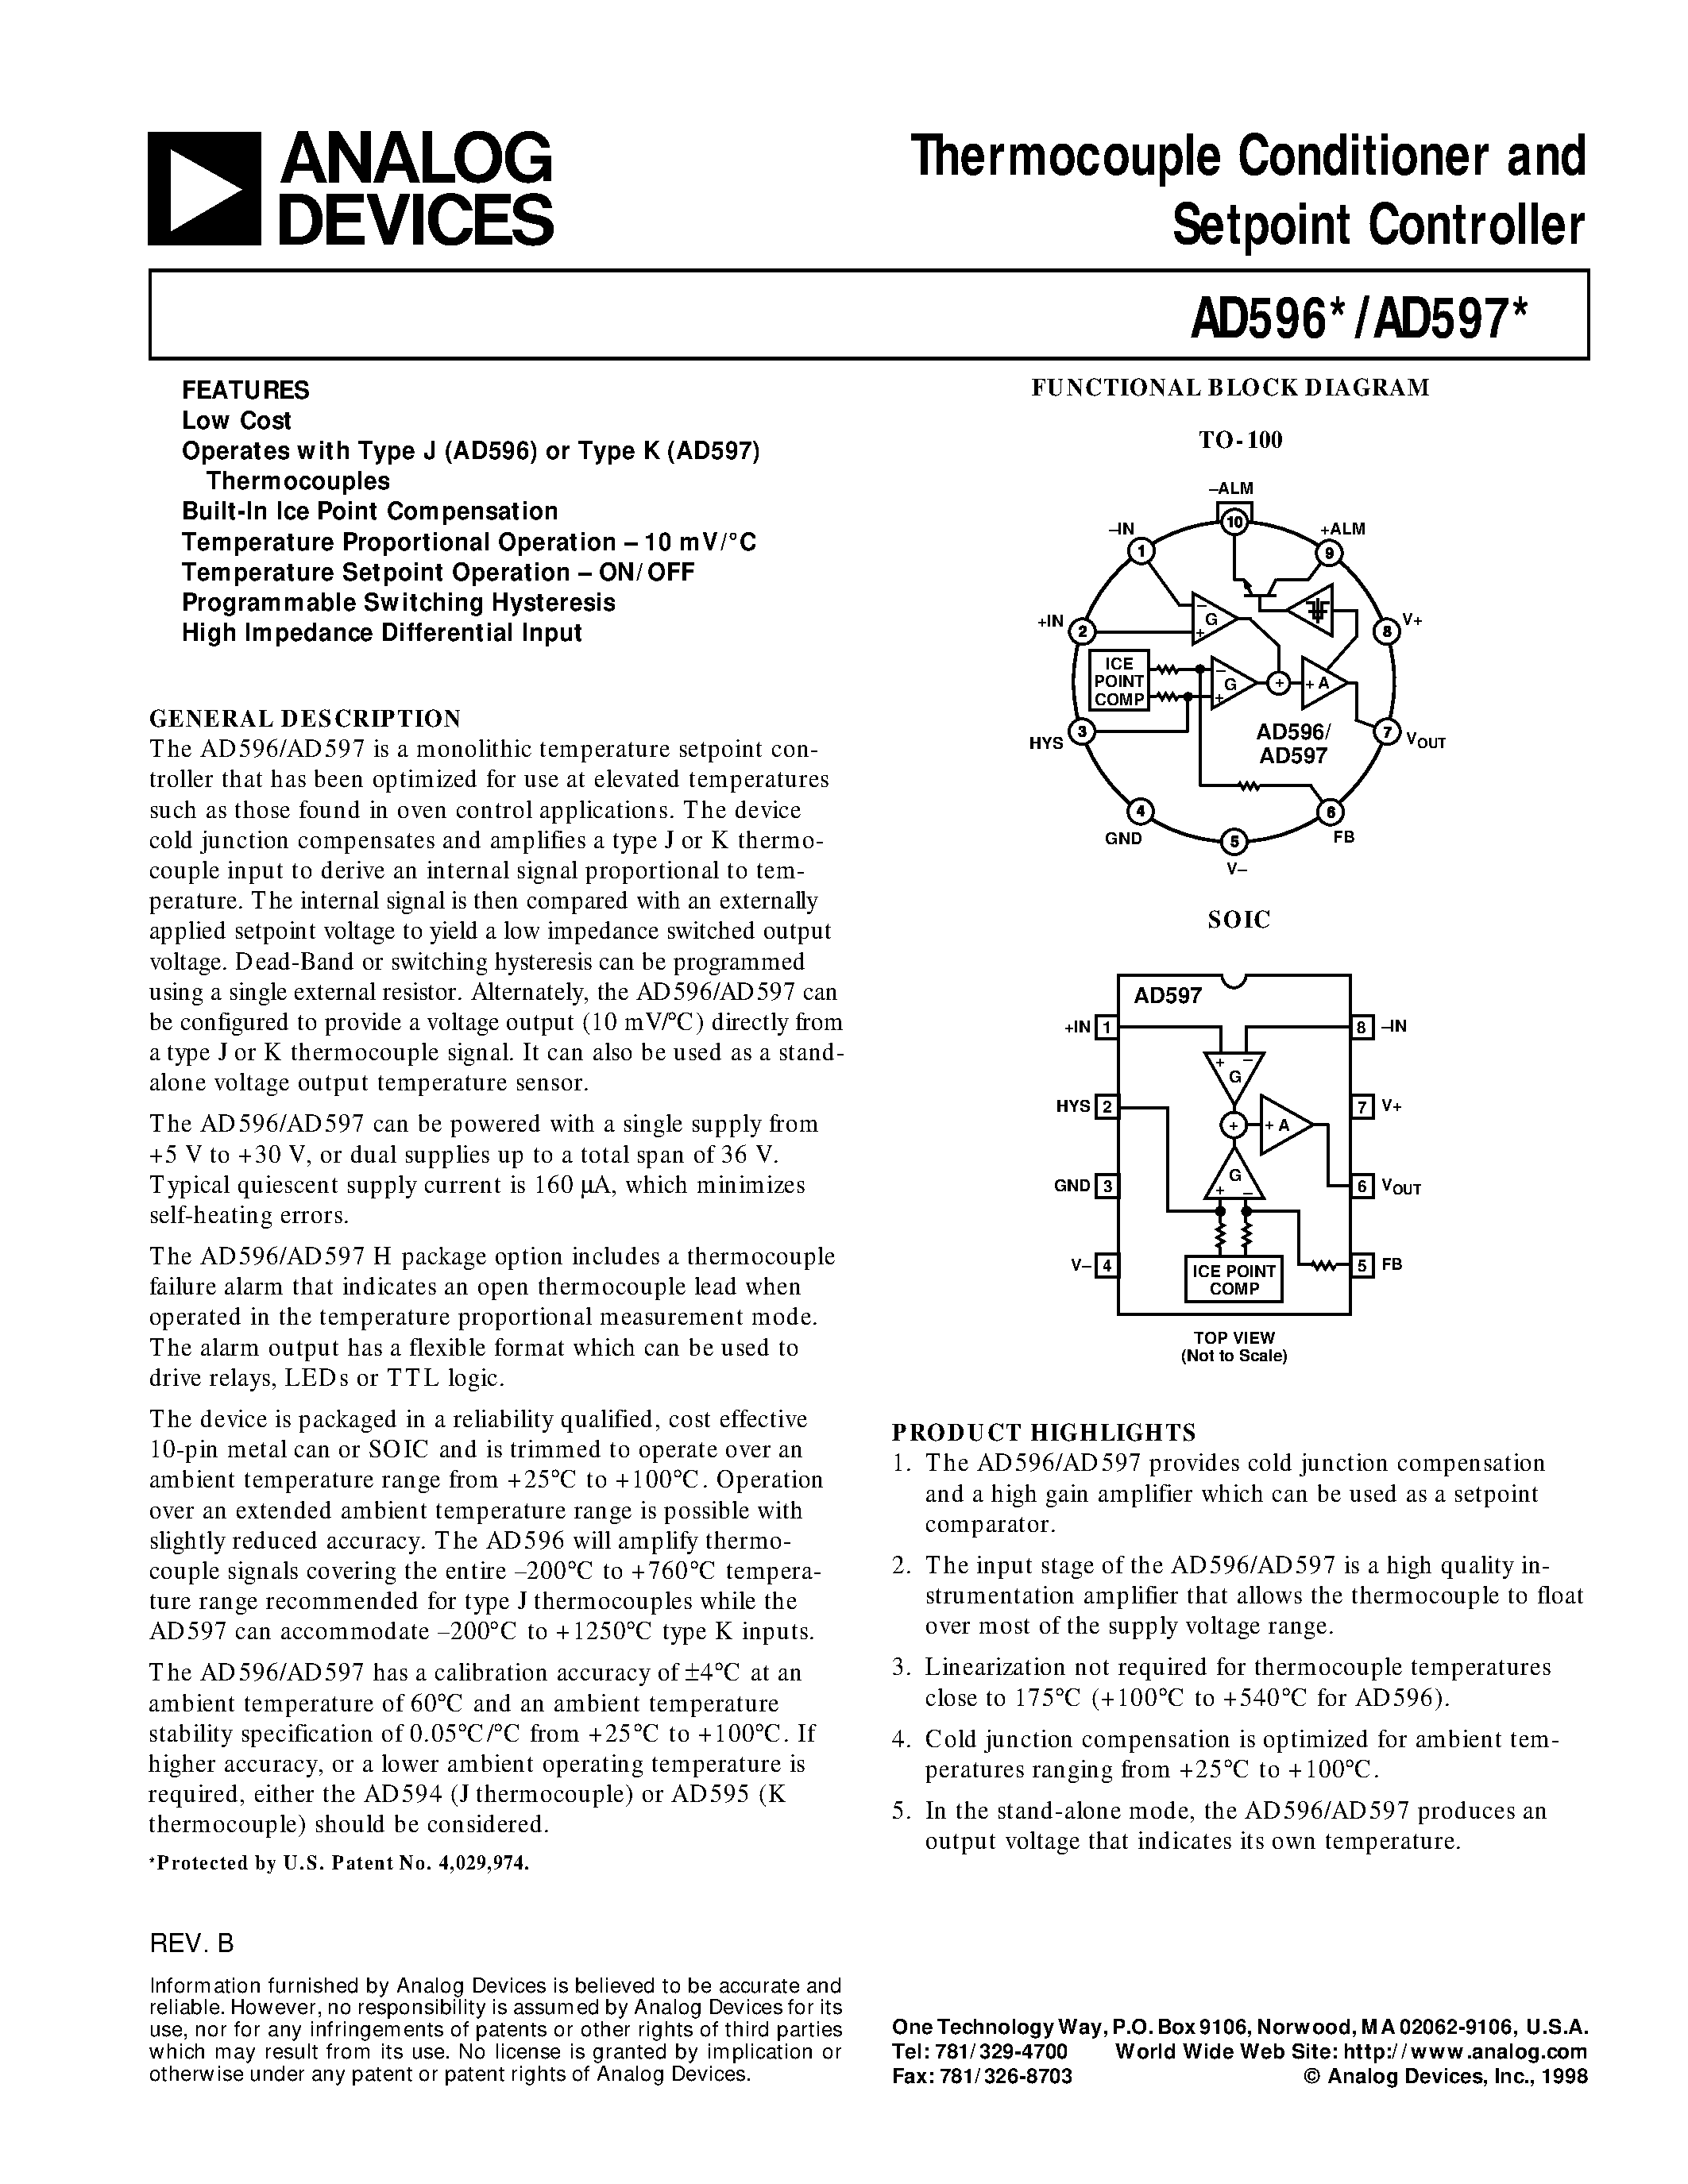 Datasheet AD597AH - Thermocouple Conditioner and Setpoint Controller page 1